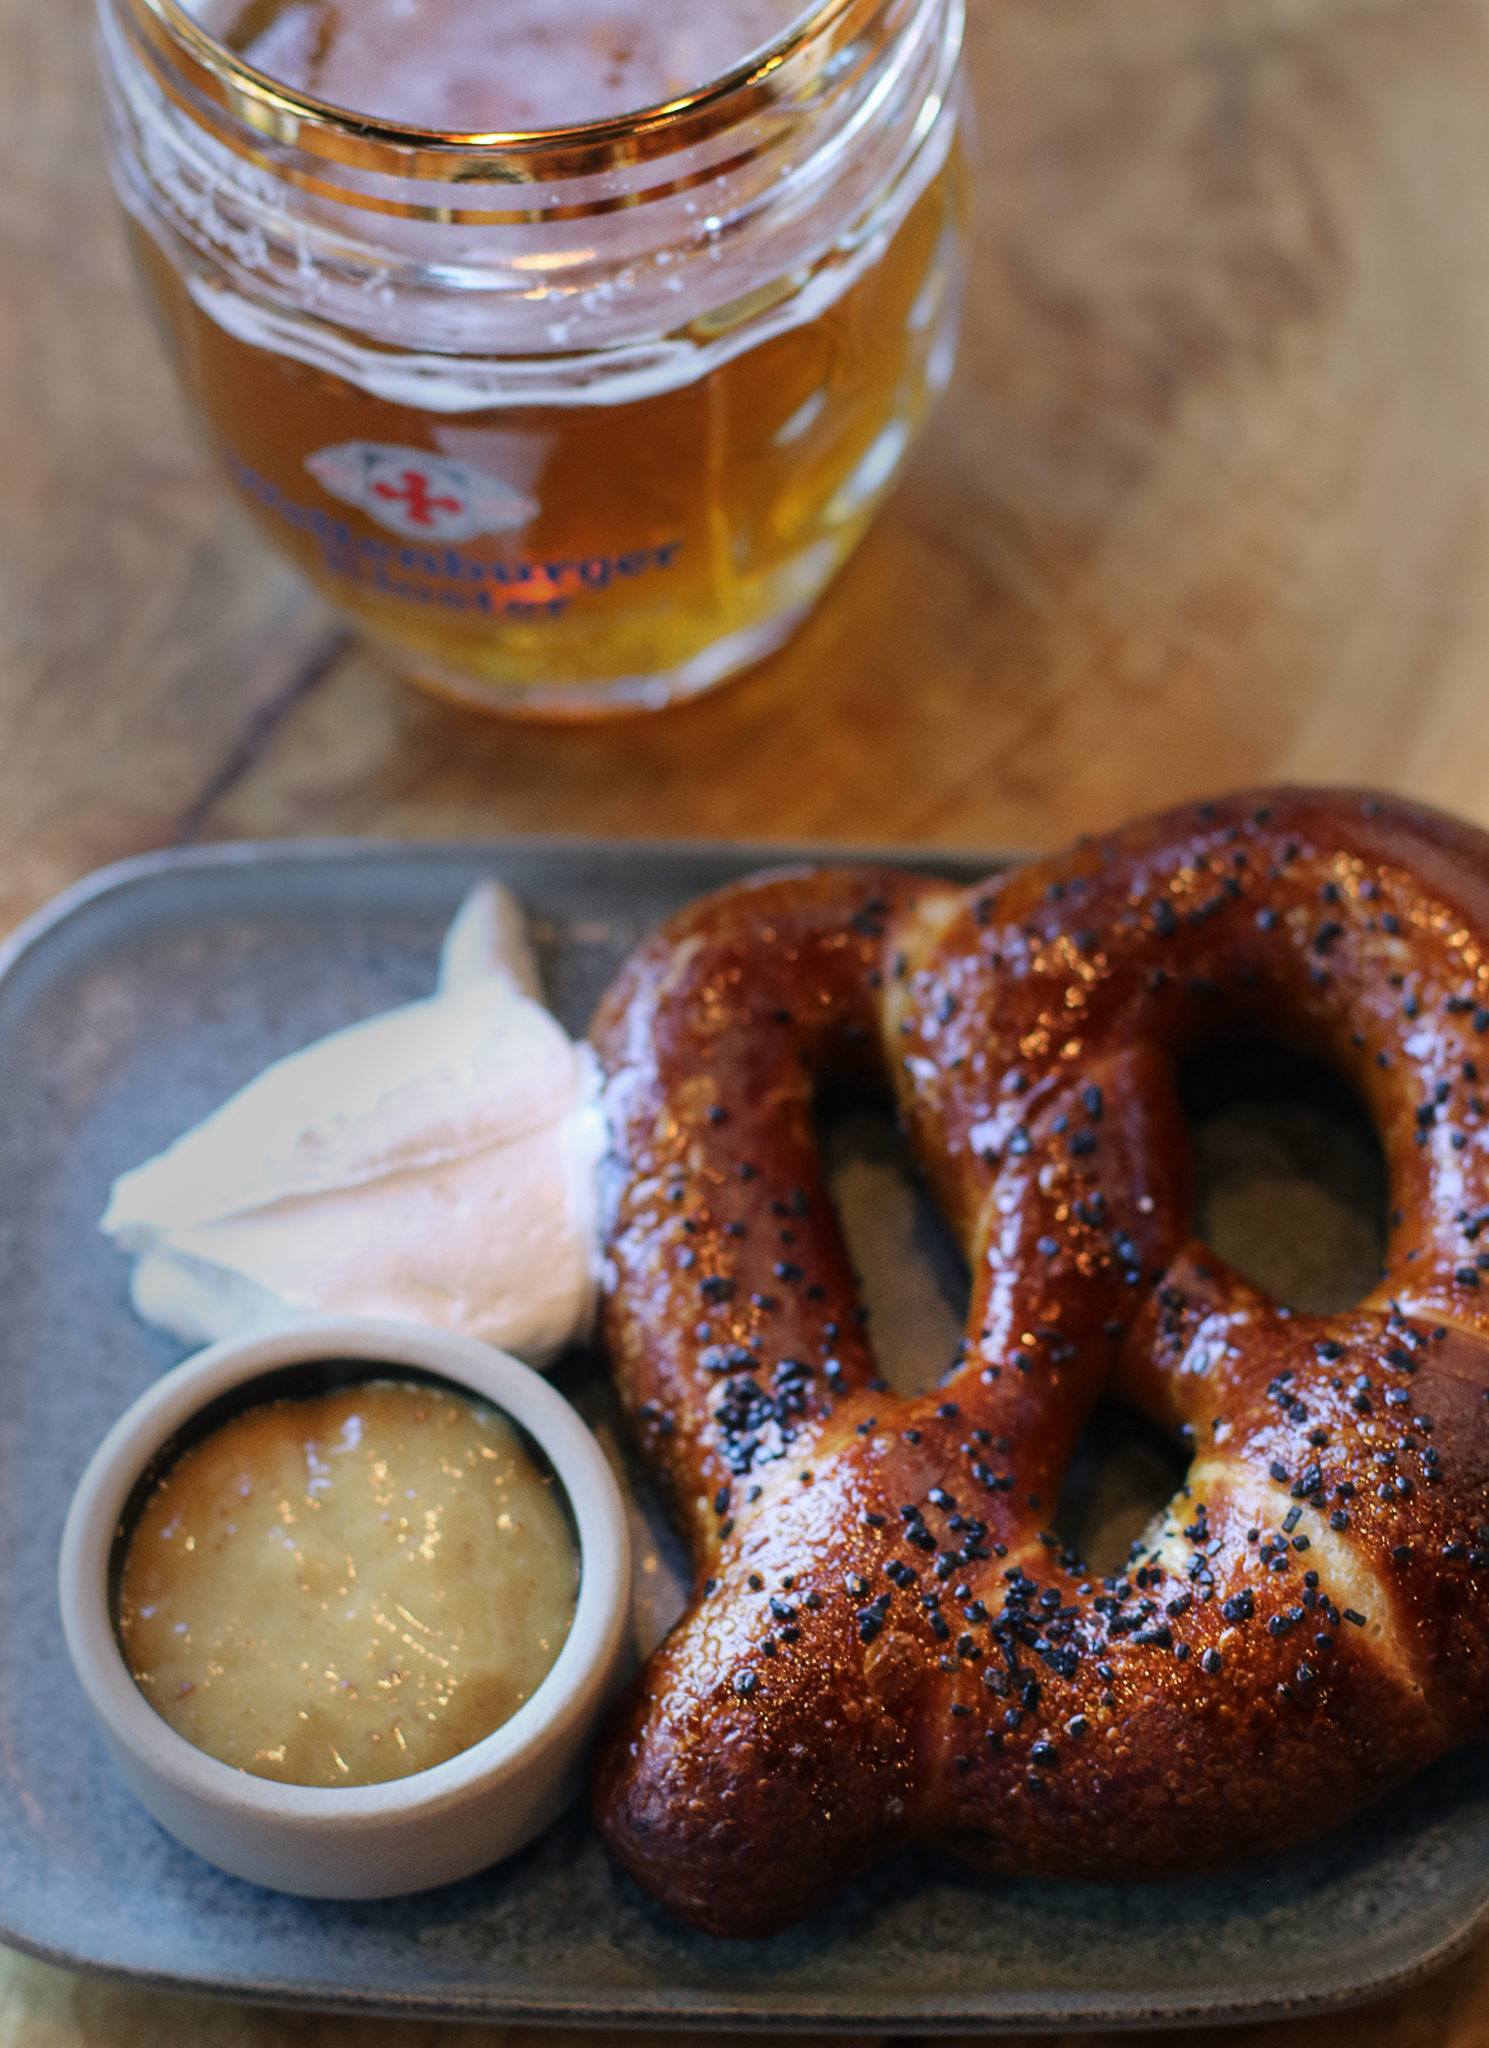 Bavarian pretzel with butter, mustard at Brot in Guerneville. Heather Irwin/PD